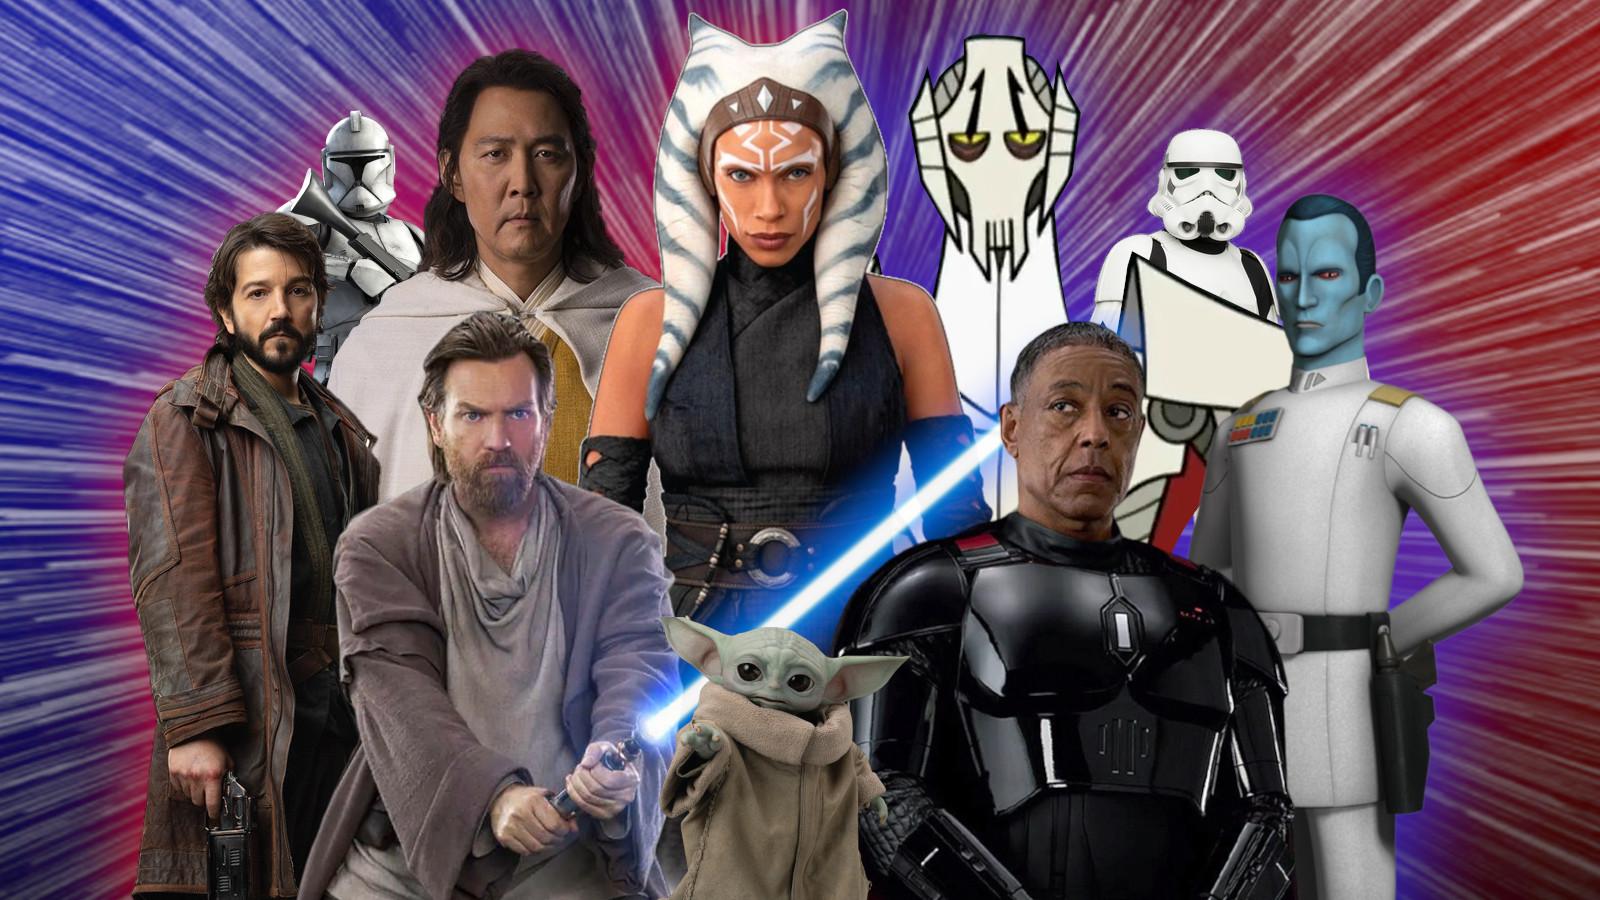 Ahsoka, Kenobi, General grevious, moff Gideon< grogu represent out choices for the best Star Wars TV shows